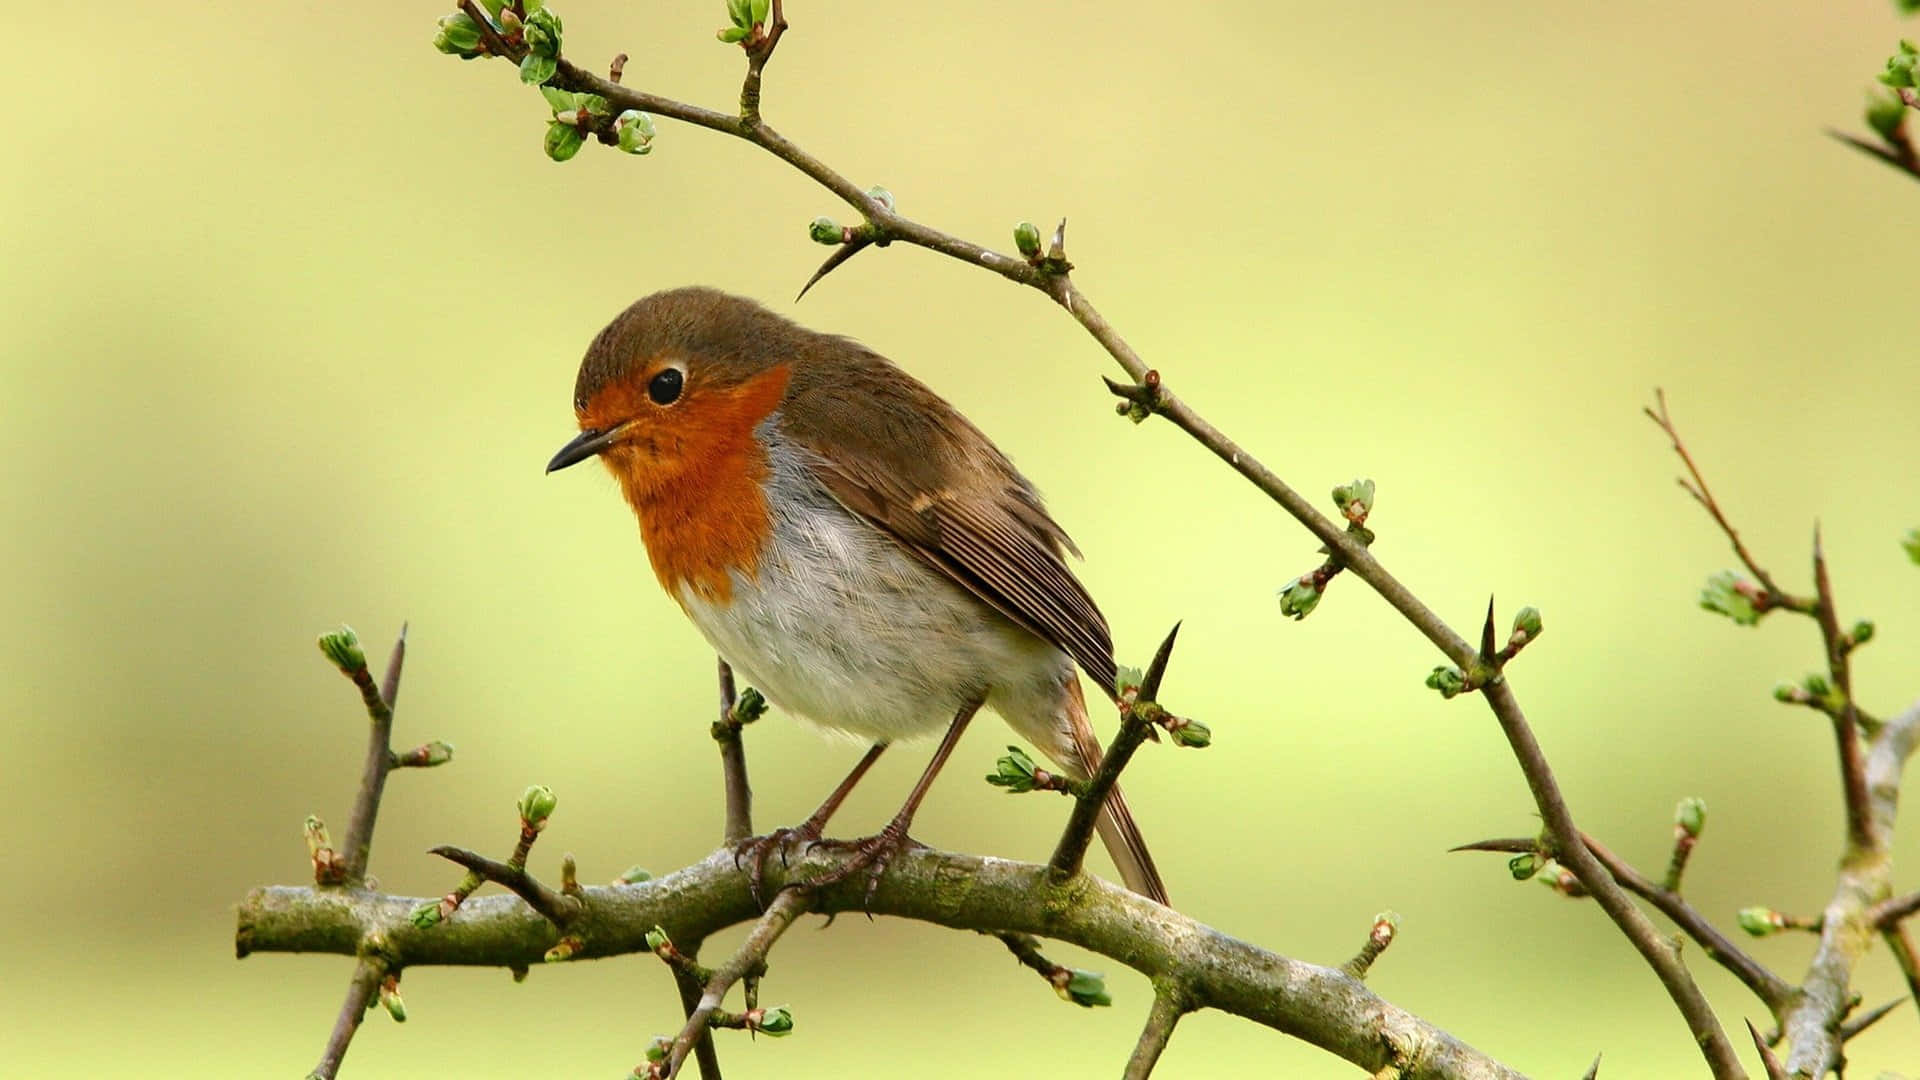 A vibrant red-breasted European Robin perched on a branch